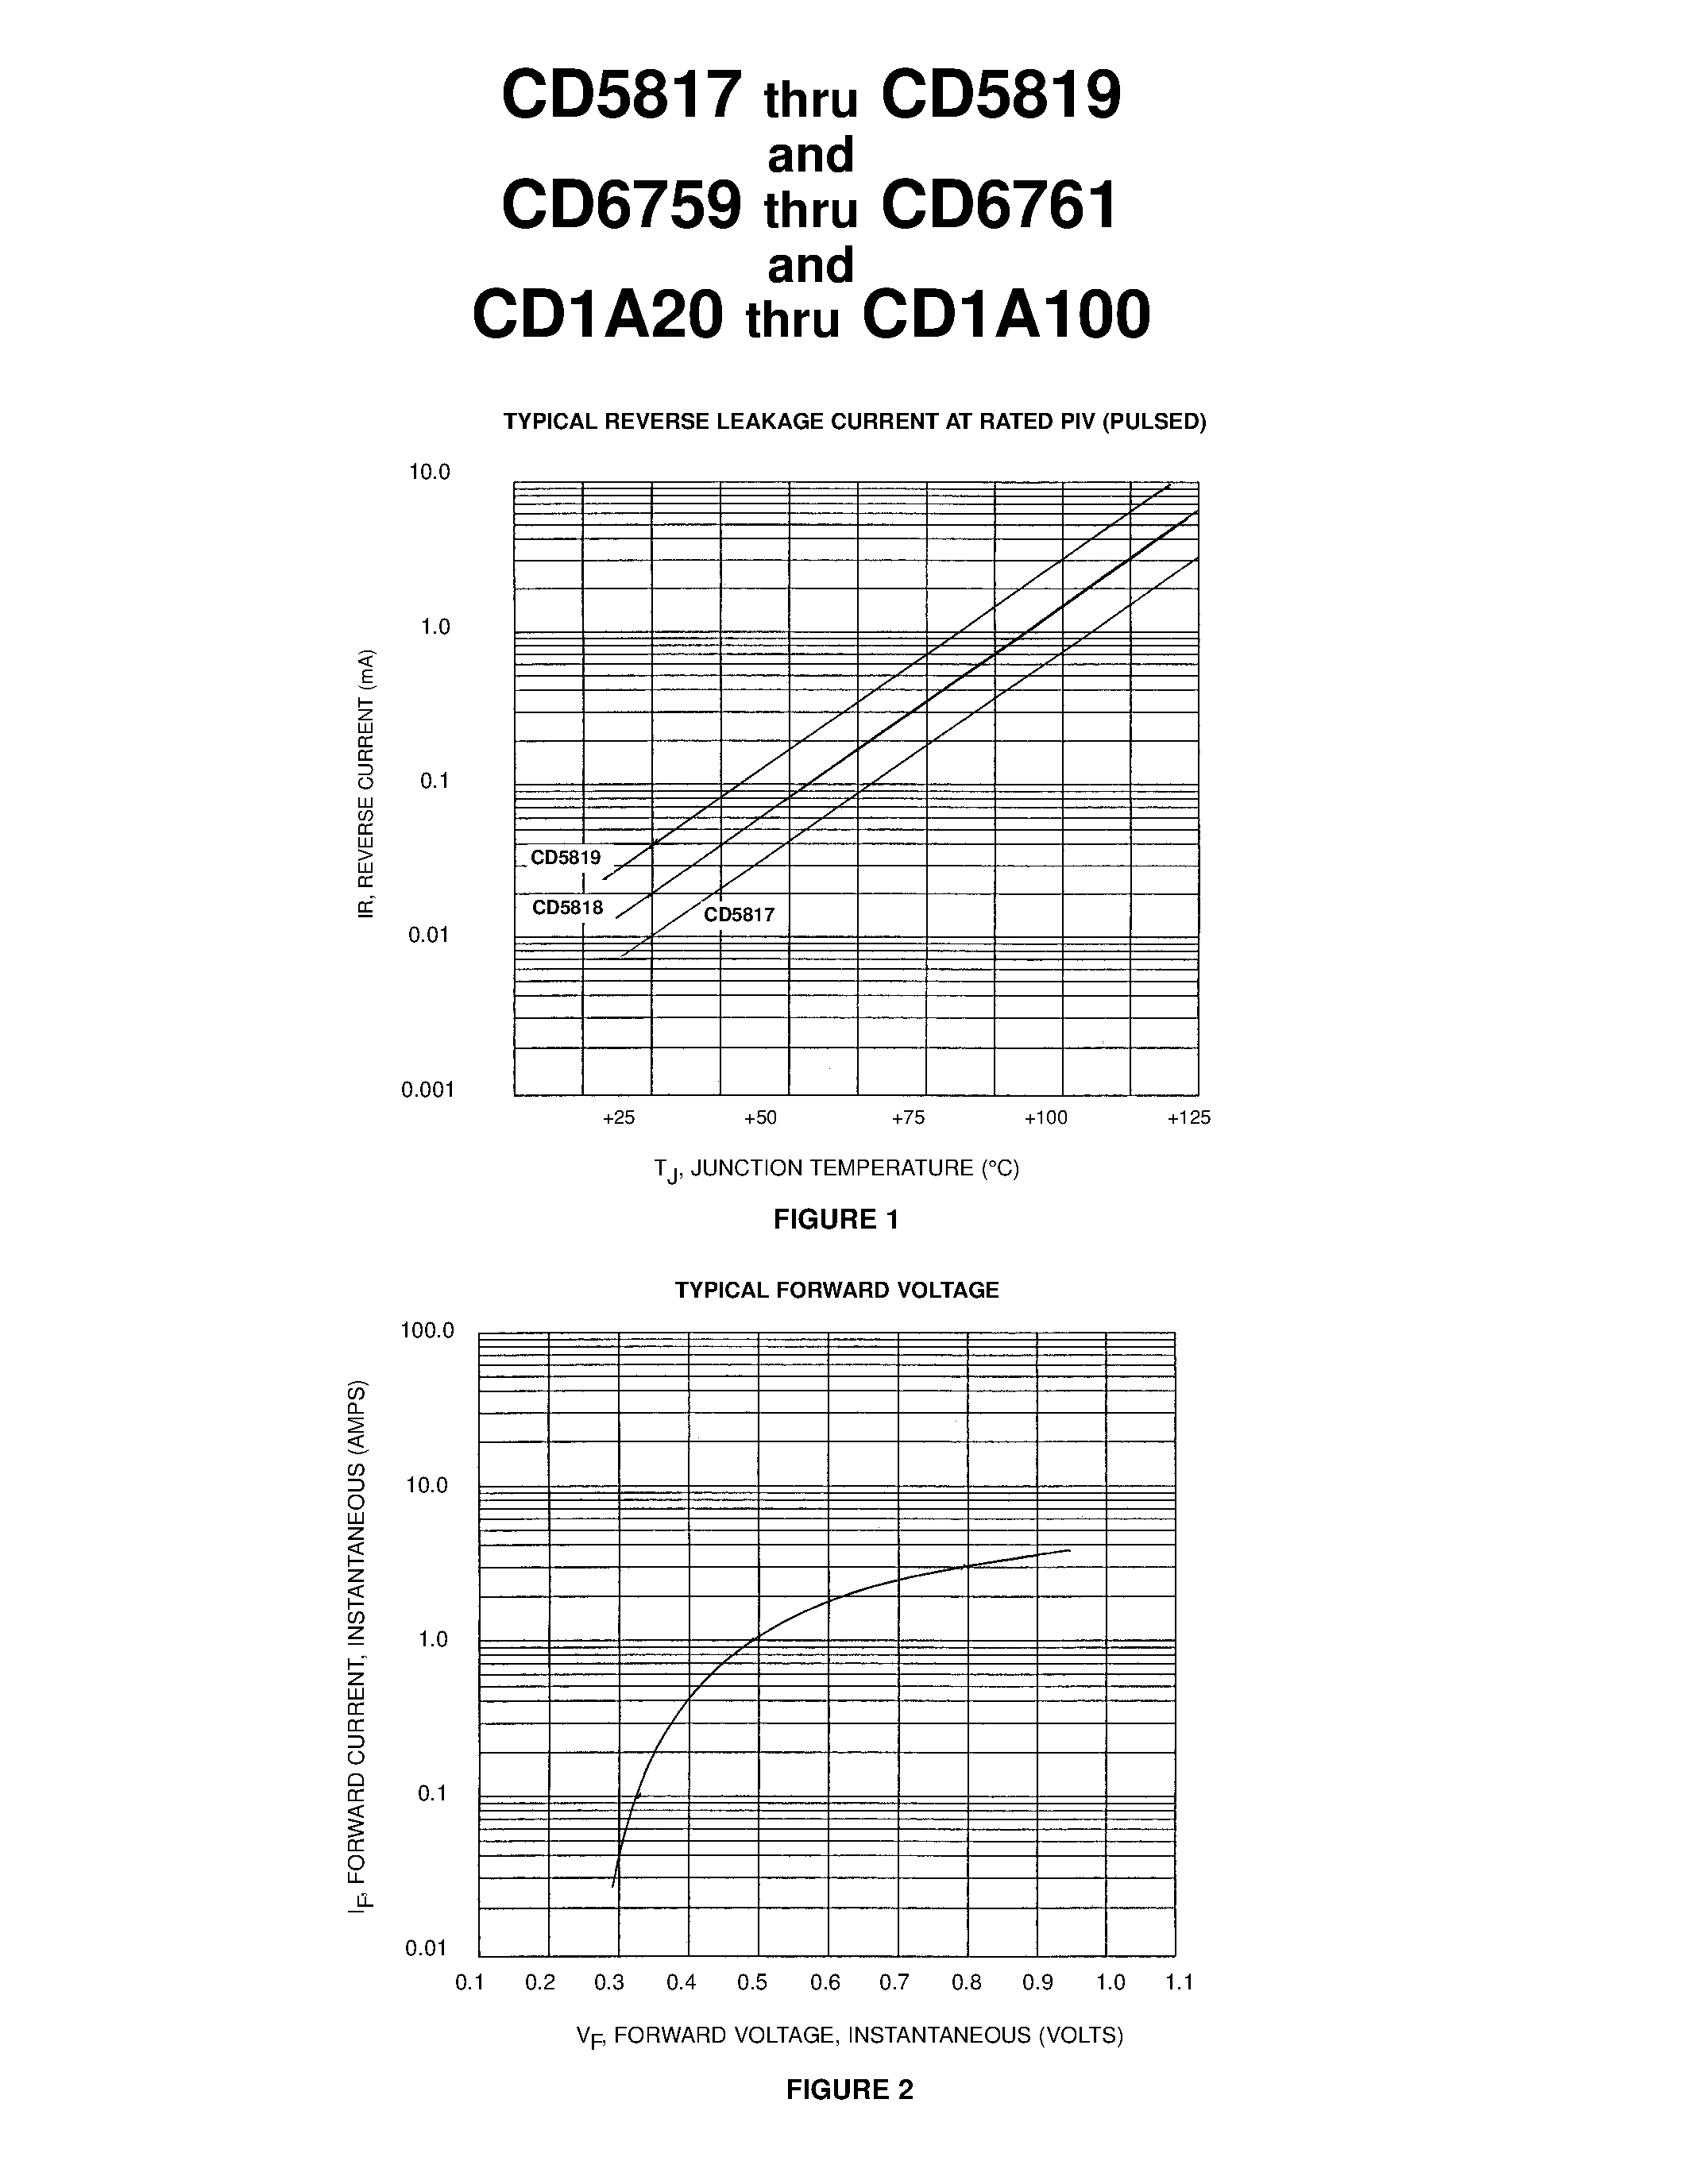 Datasheet CD1A50 - 1 AMP SCHOTTKY BARRIER RECTIFIER CHIPS page 2